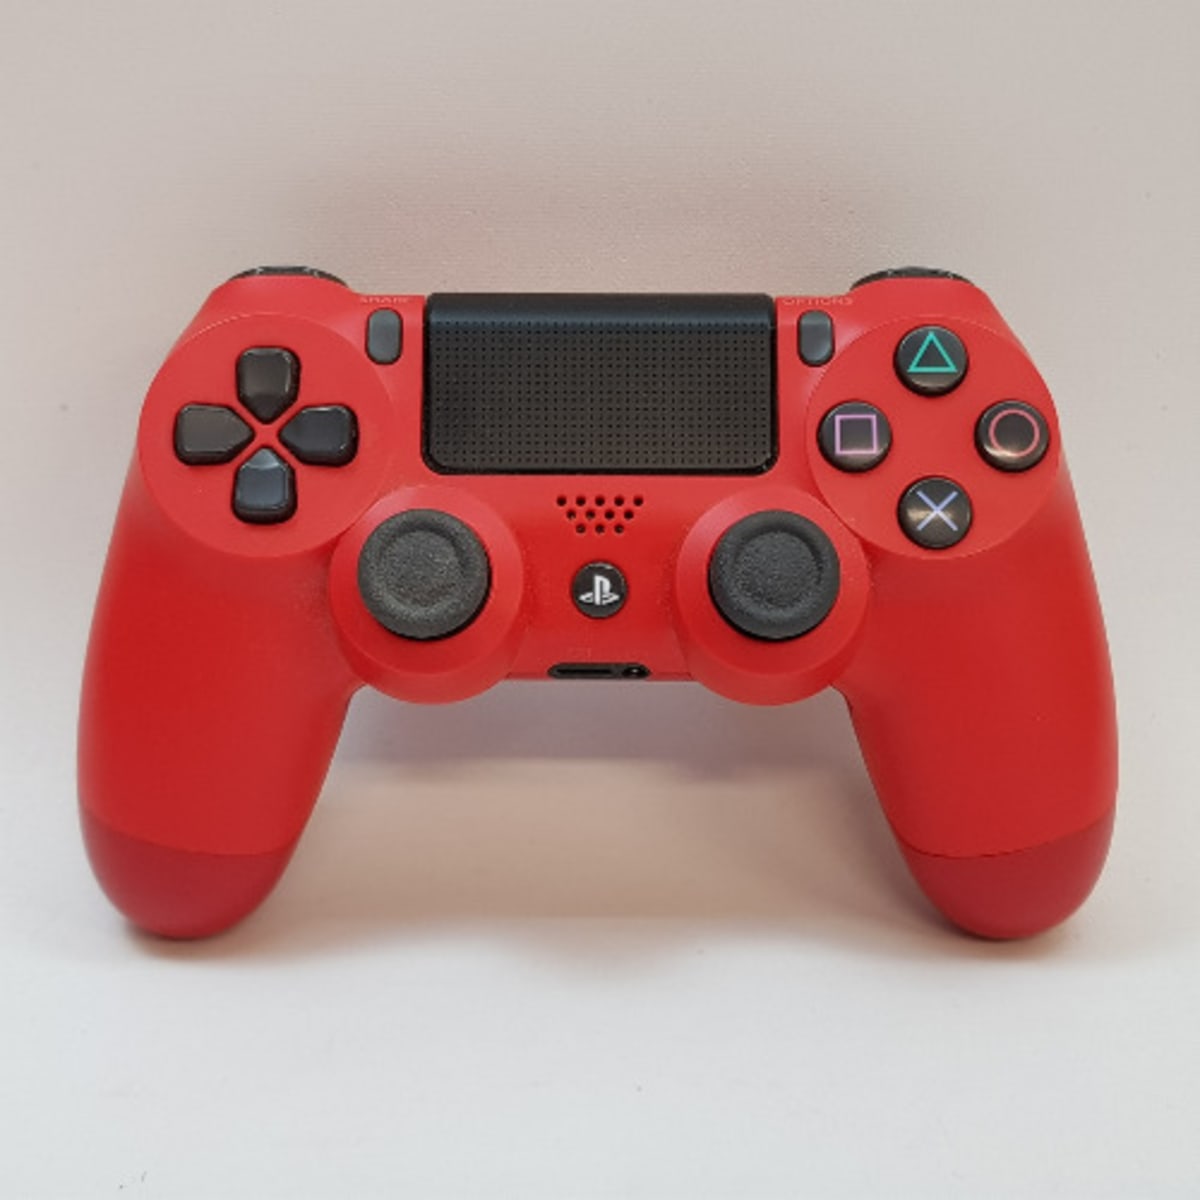 Sony Dualshock 4 Wireless Controller For Playstation 4 - Red